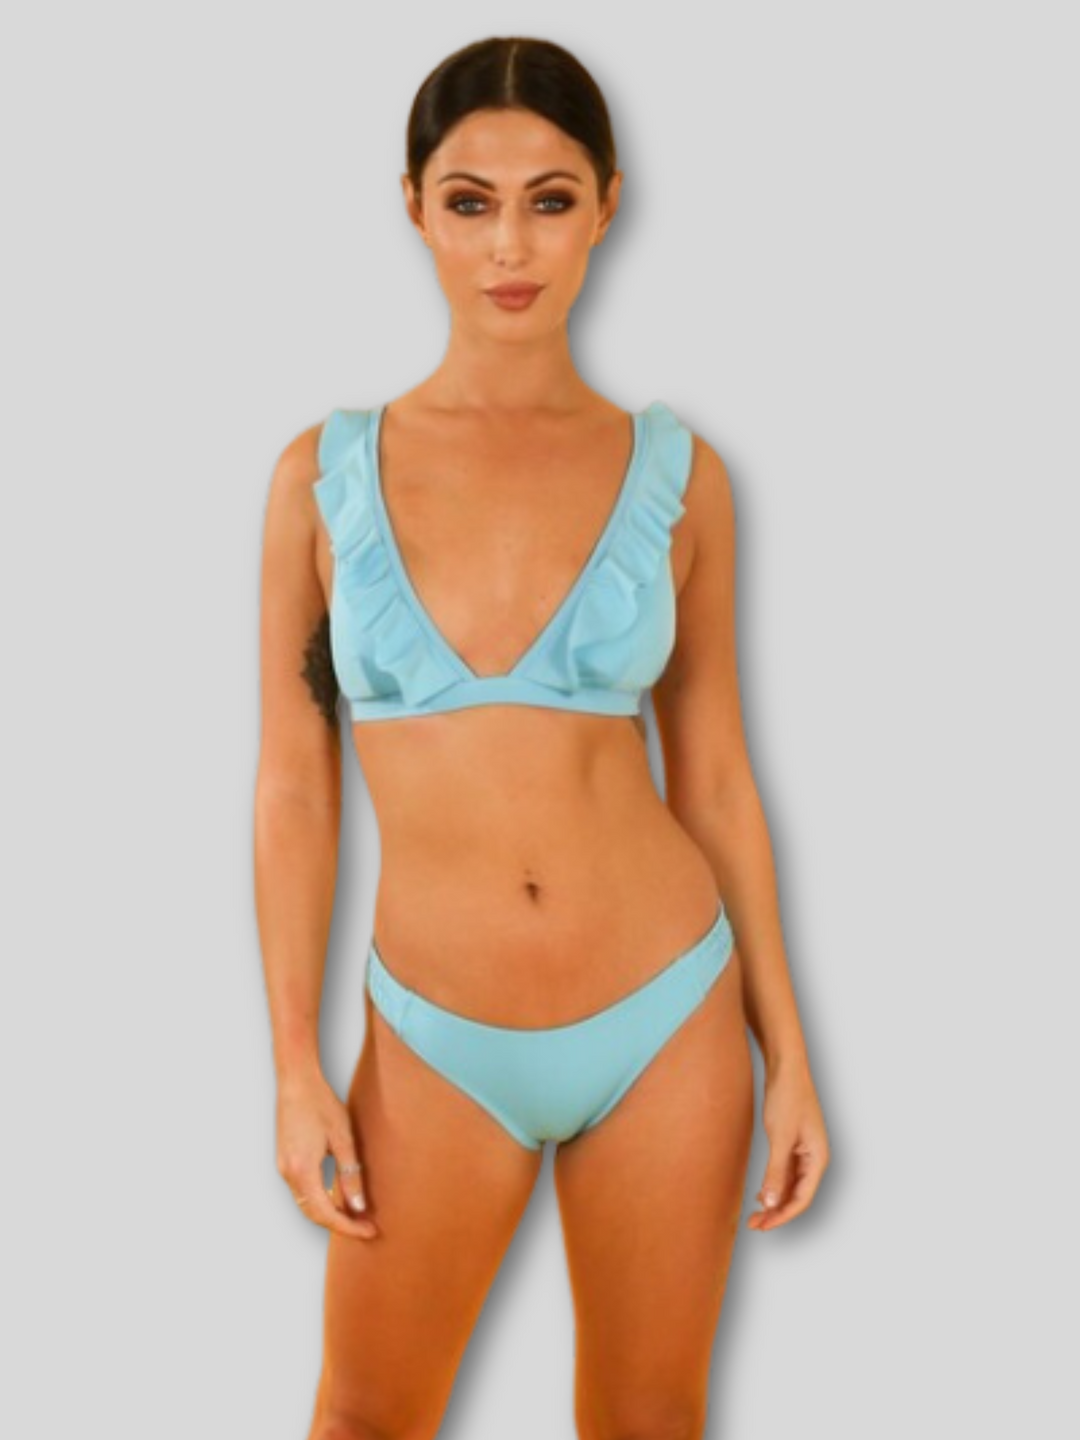 Model wears a turquoise bikiniset with padded bikini cup detailing and a frill trim. Model stands with her hands by her sides.